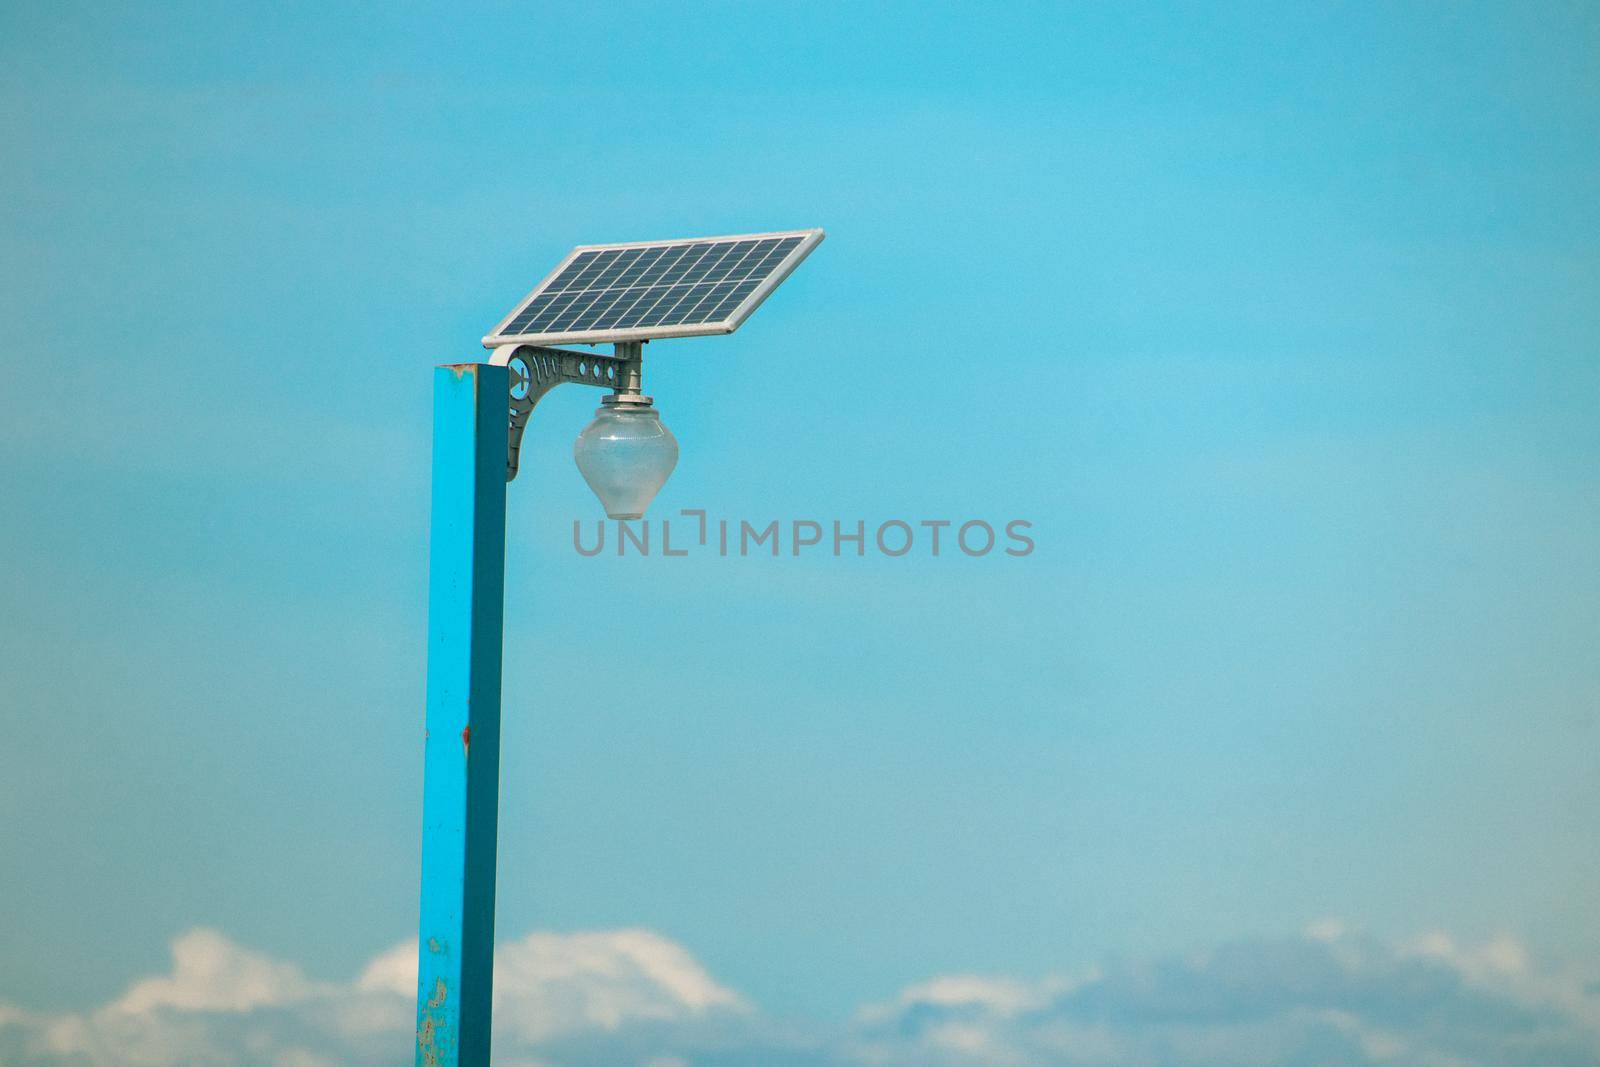 A solar-powered lamp post against the blue sky by Sonnet15